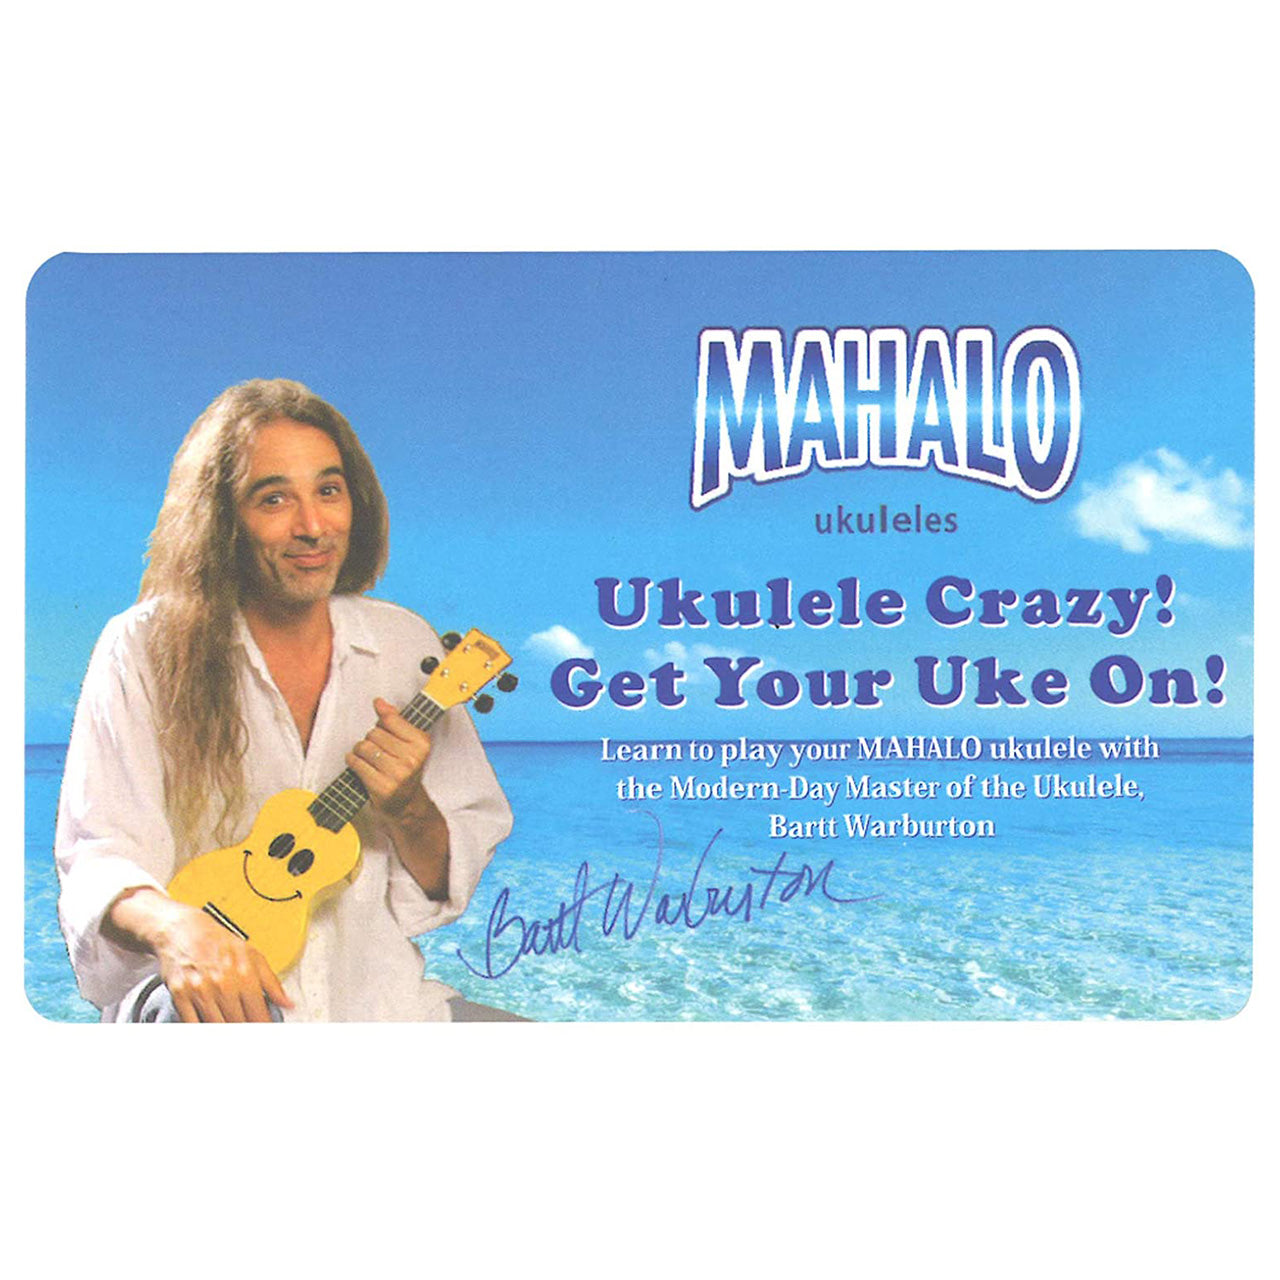 Mahalo Ukulele Introductory Essential Kit Accessory Pack (Electronic Clip On Tuner, Aquila Strings, 3 Picks) MZK1